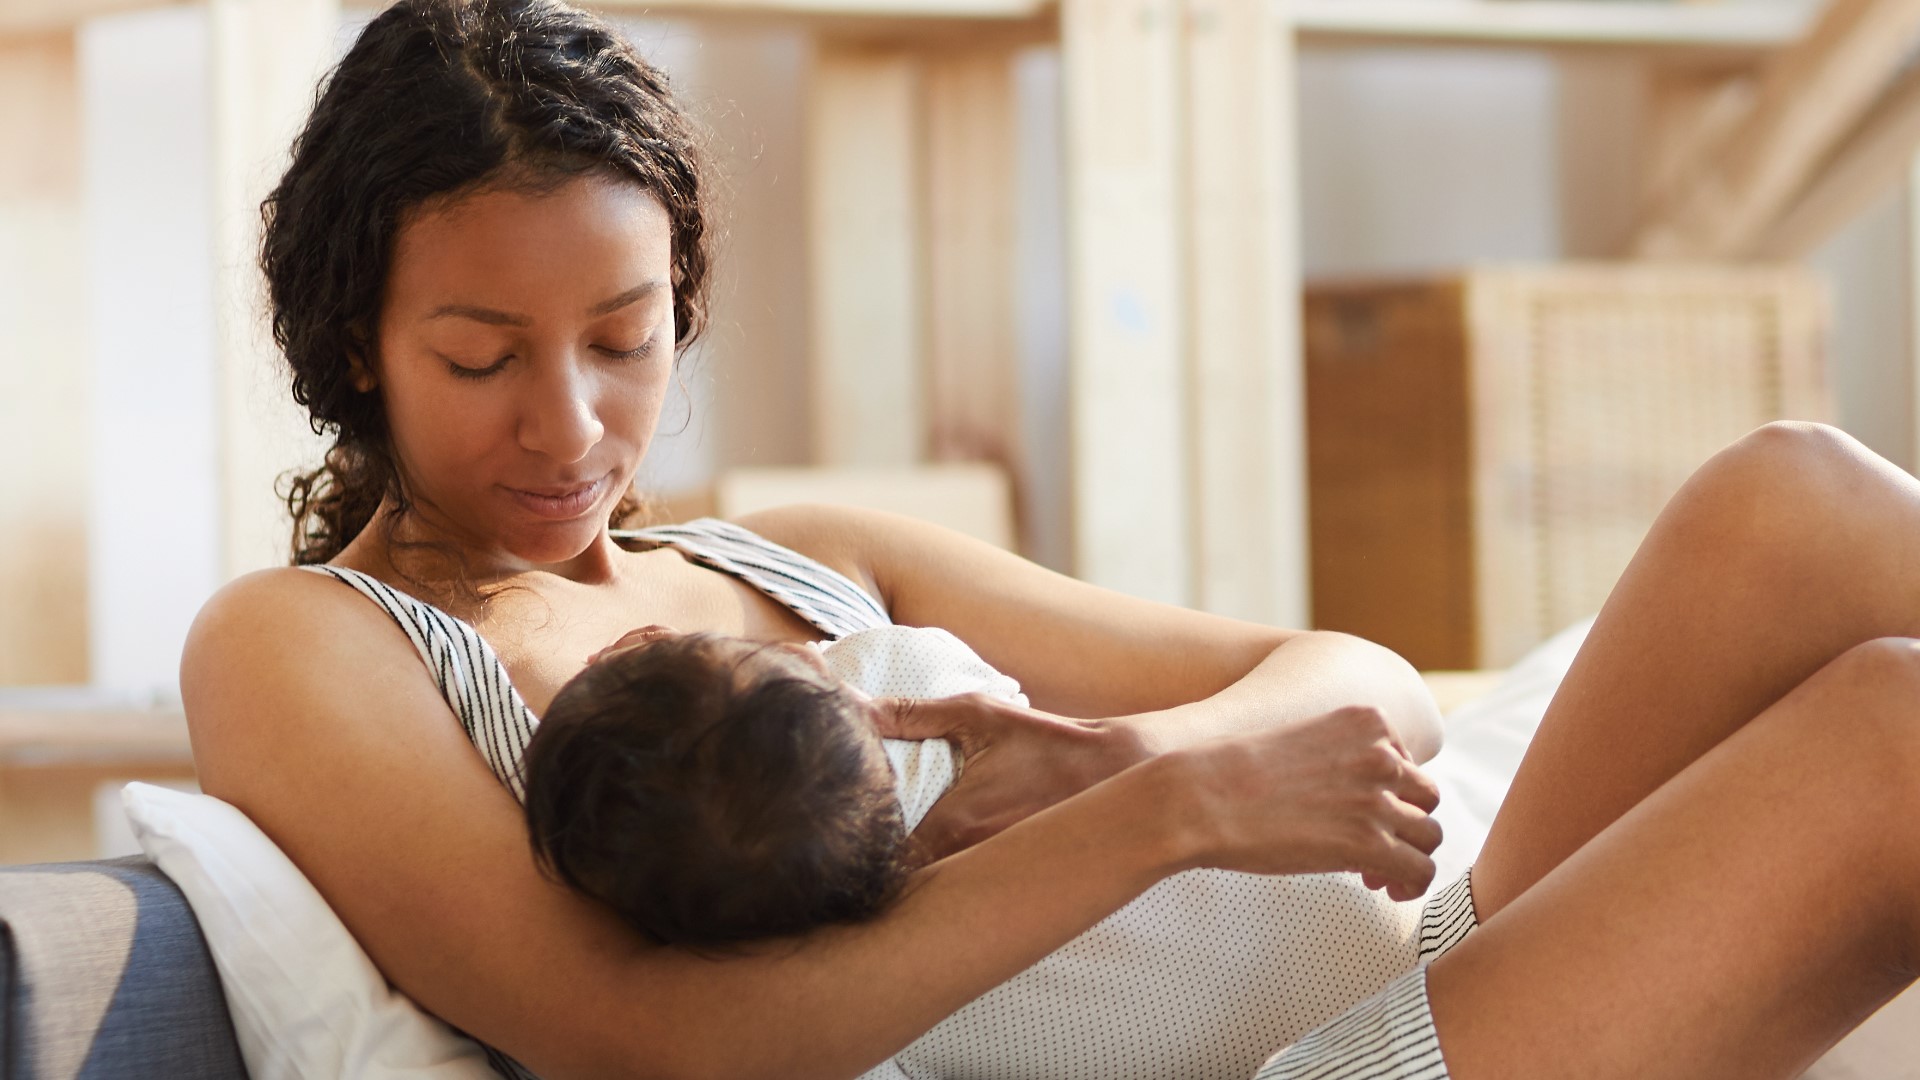 Last month, the American Academy of Pediatrics made some changes to its policies on breastfeeding.